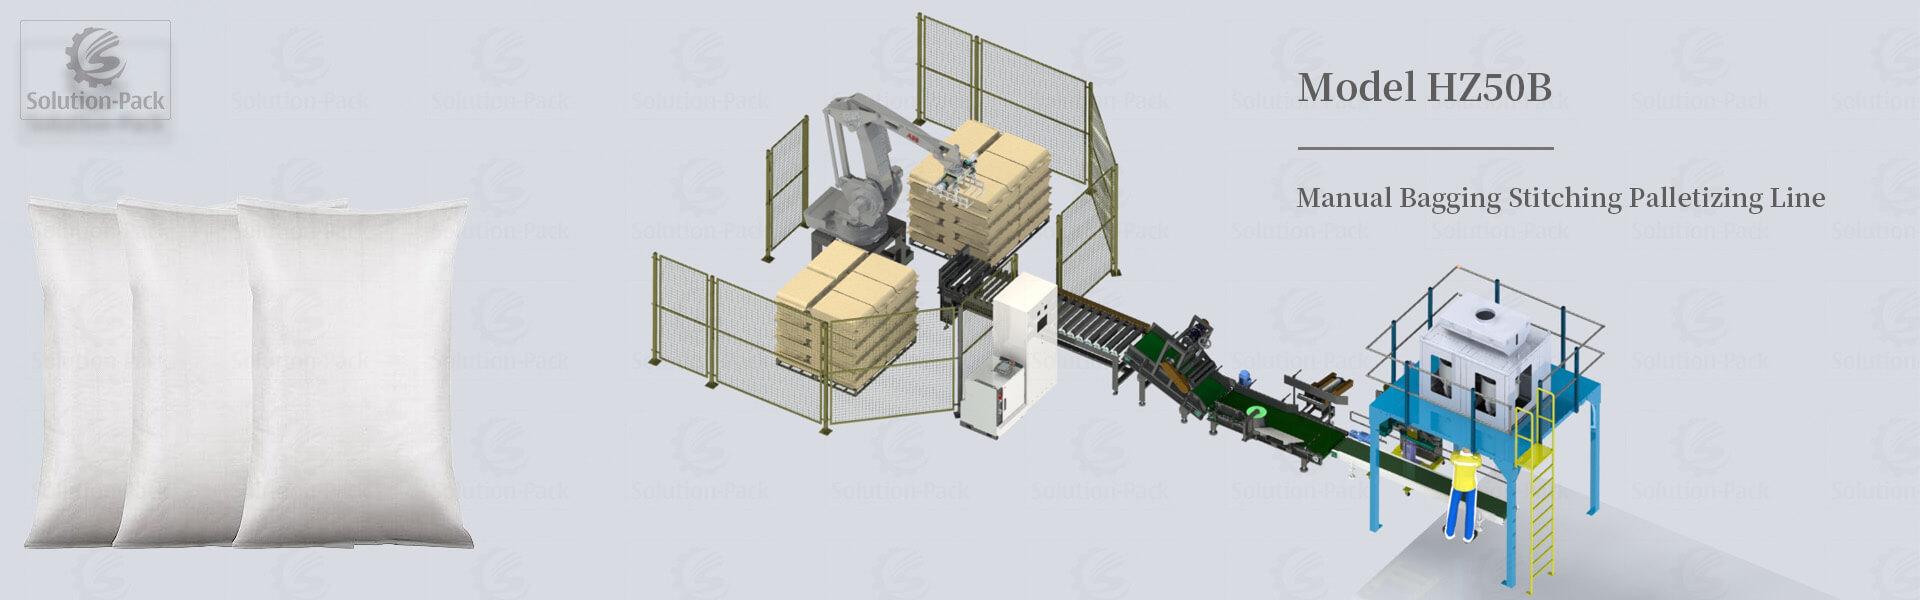 Solution-Pack | HZ50B Double Hopper Manual Bagging Machine Main View Picture | Semi-Automatic Bagging Palletizing Line | Manual Bagging Stitching Machine Line | Industrial Bagging System